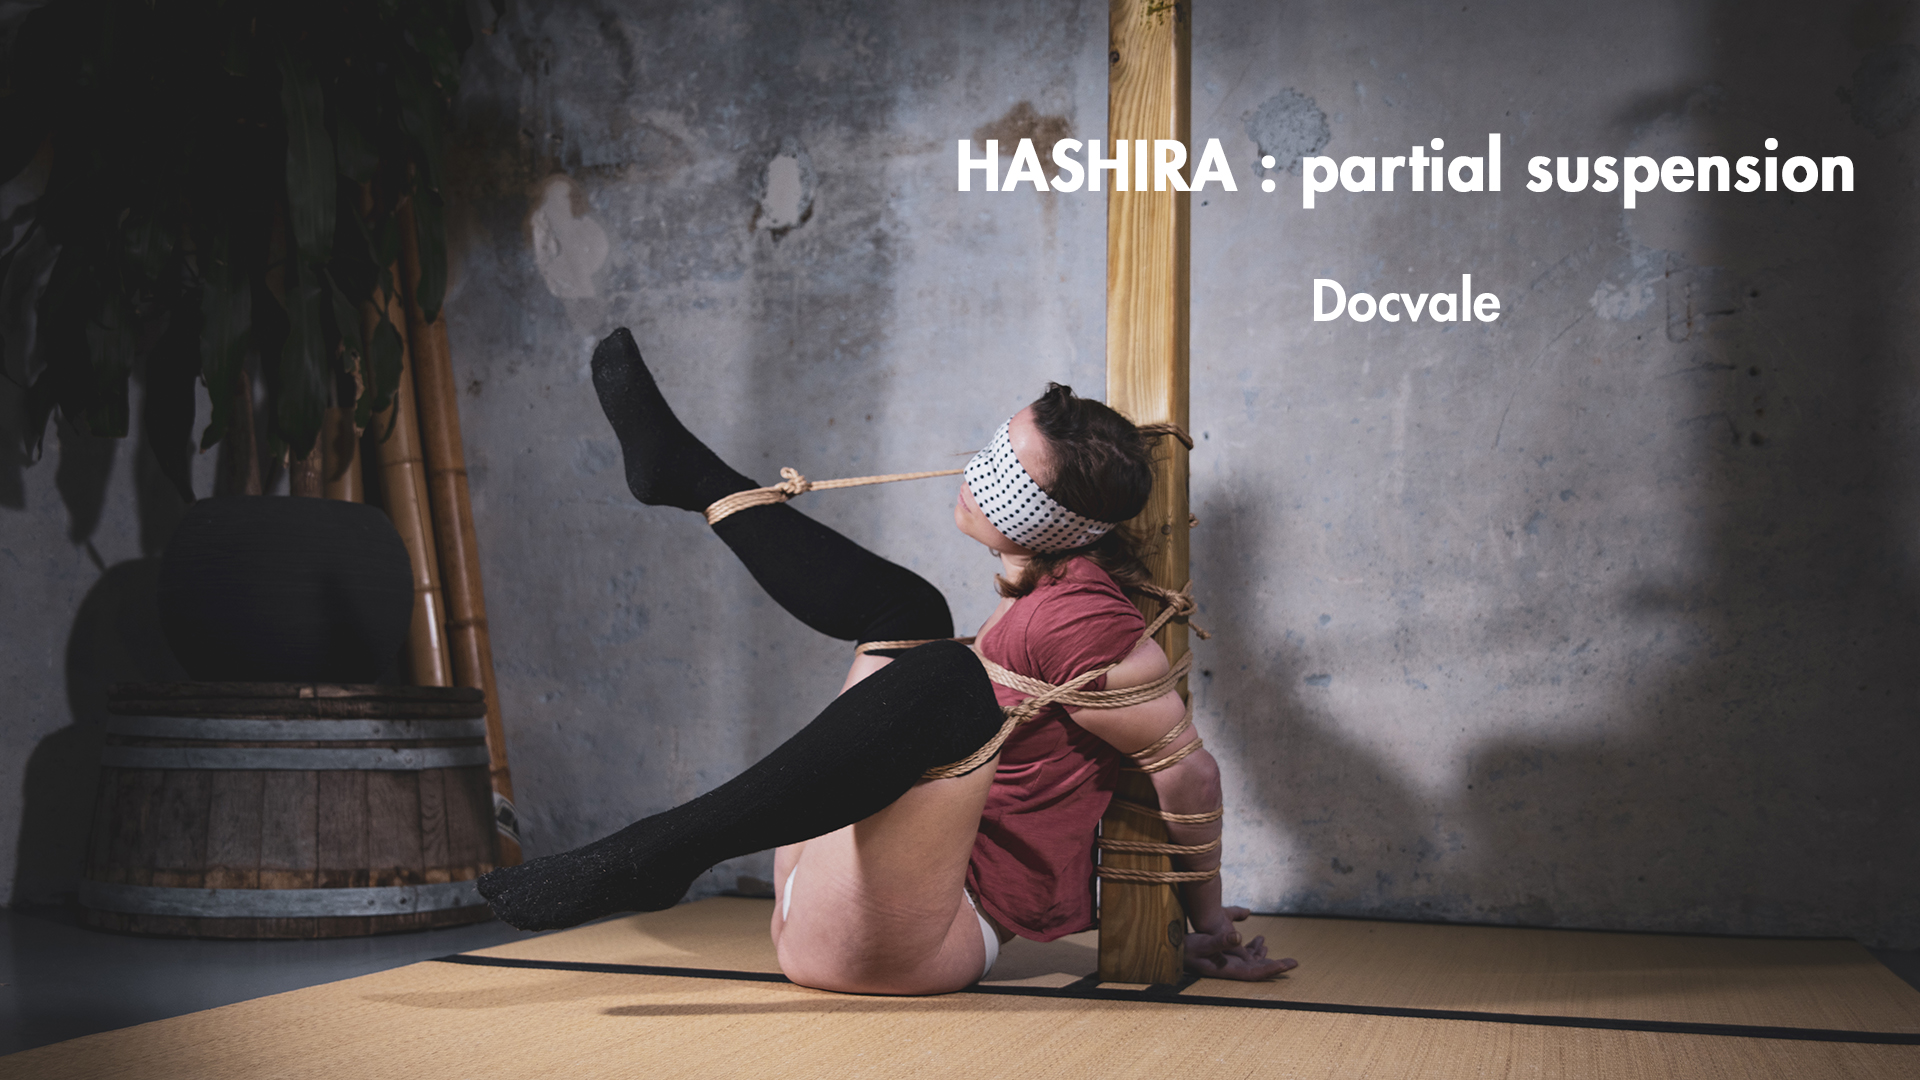 Hashira partial suspension by Docvale